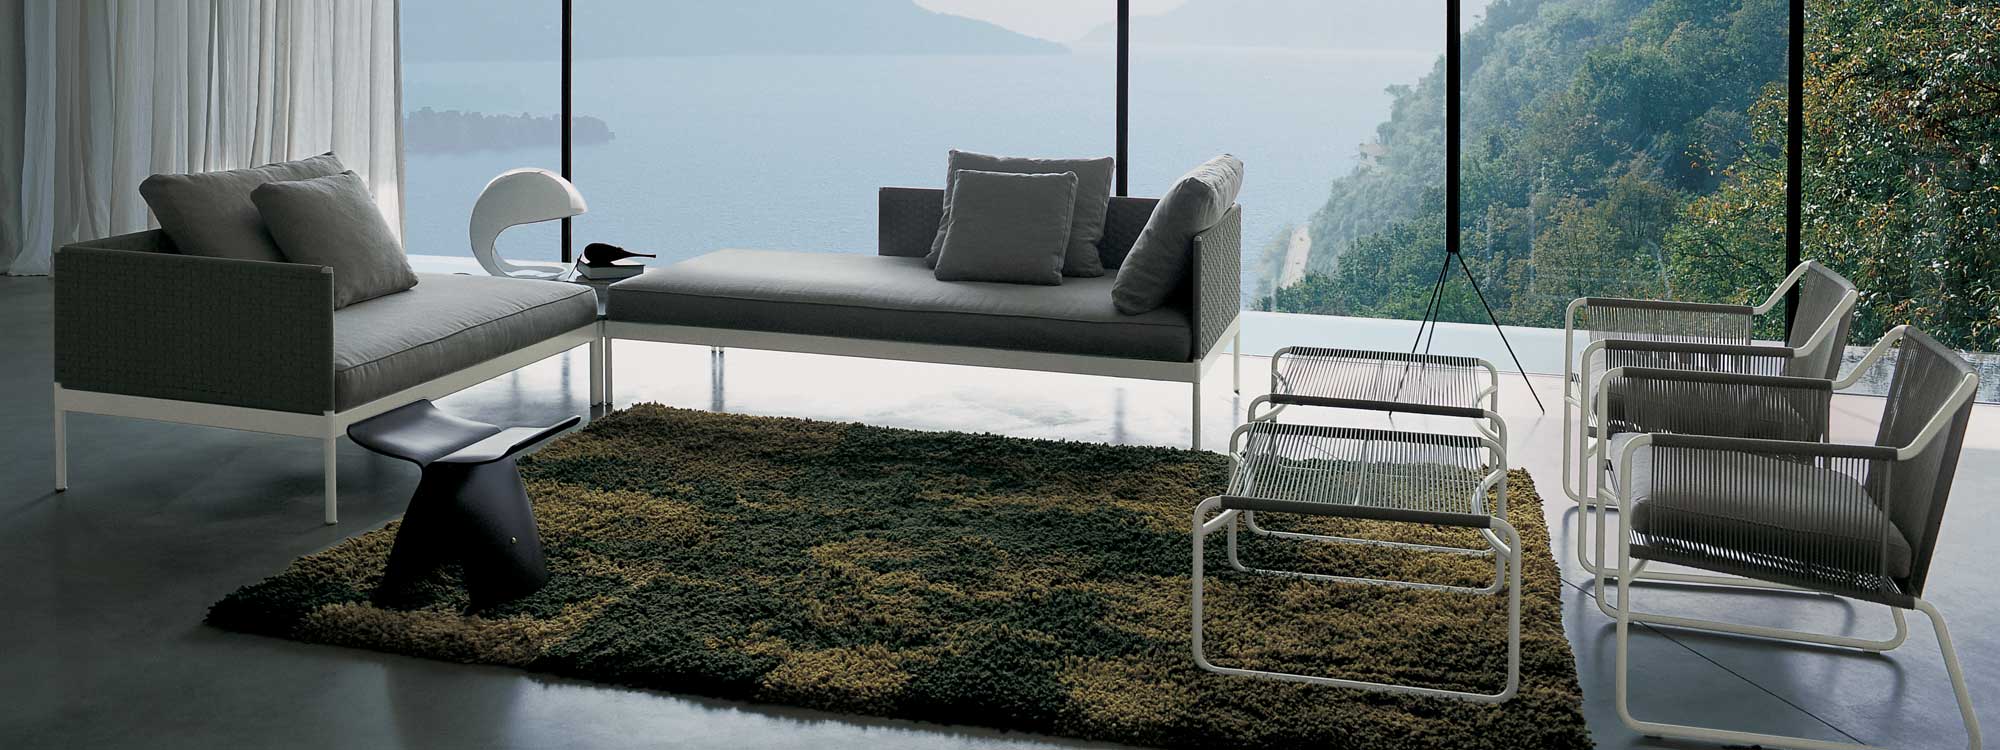 Image of RODA Basket minimalist garden sofa and Harp outdoor lounge chairs in living room overlooking expanse of Italian lake and steep hillsides